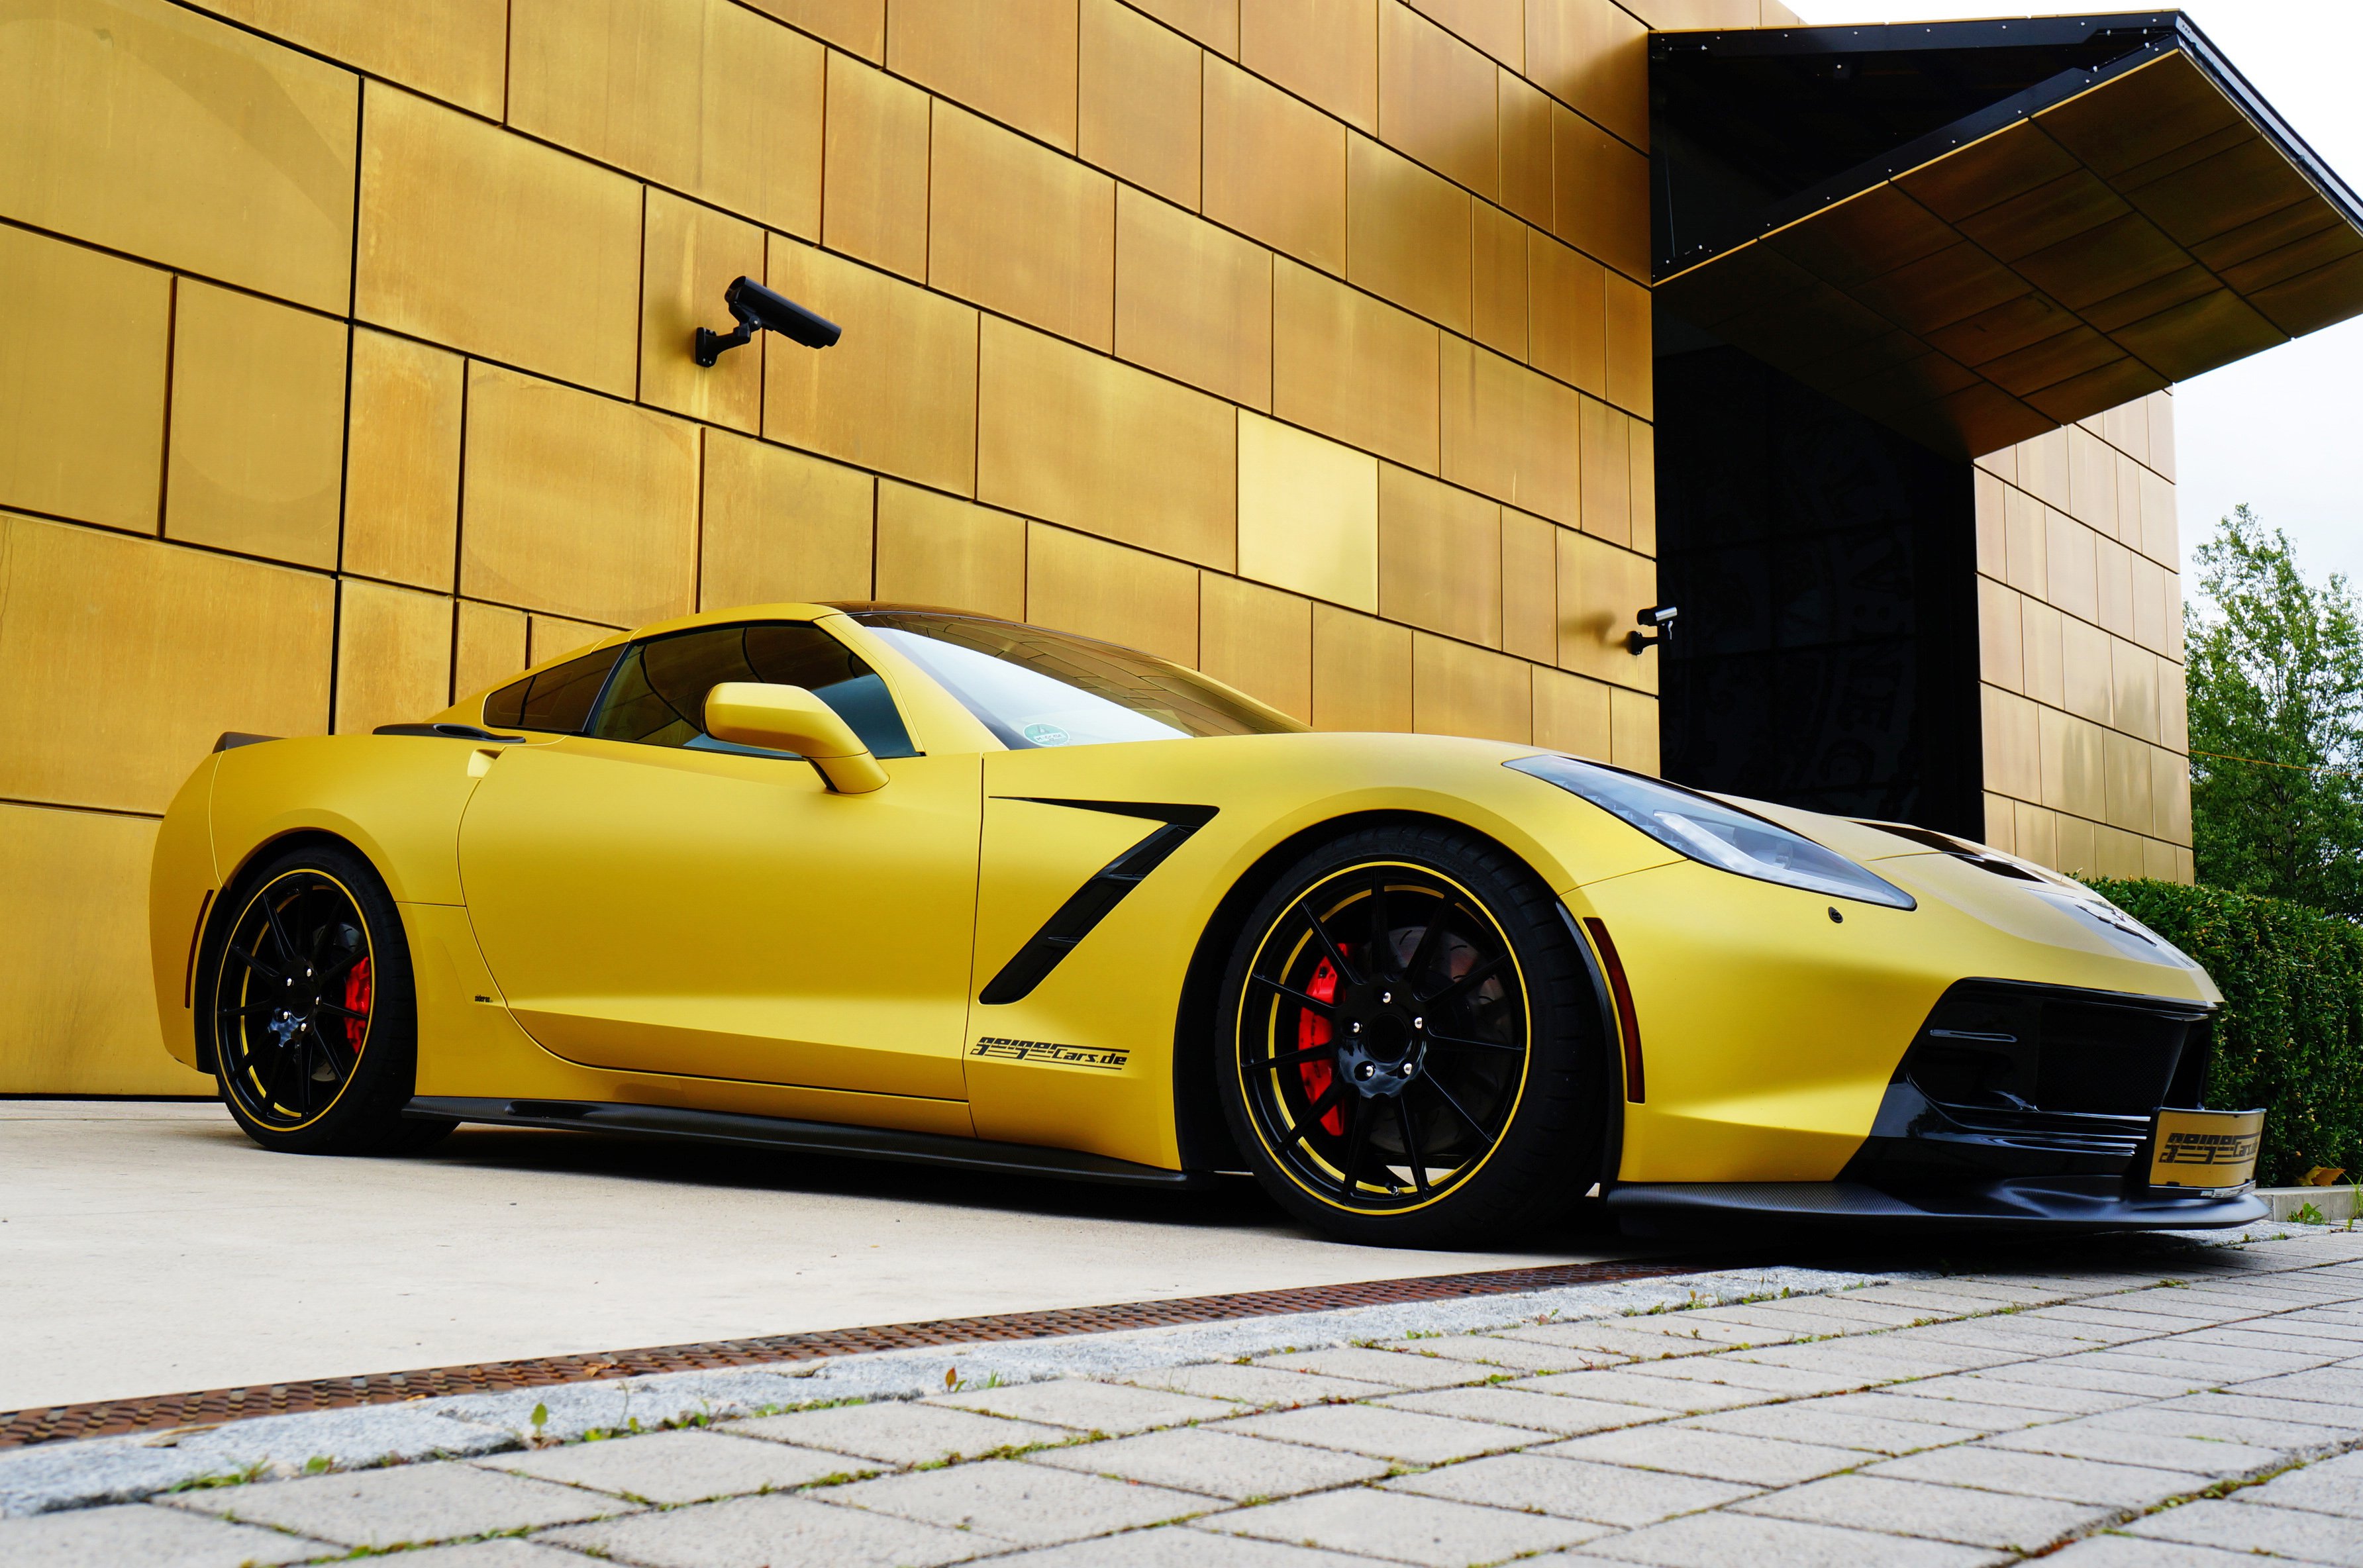 2014, Geiger, Chevrolet, Corvette, Stingray, Coupe, C 7, Tuning, Muscle, Supercar Wallpaper